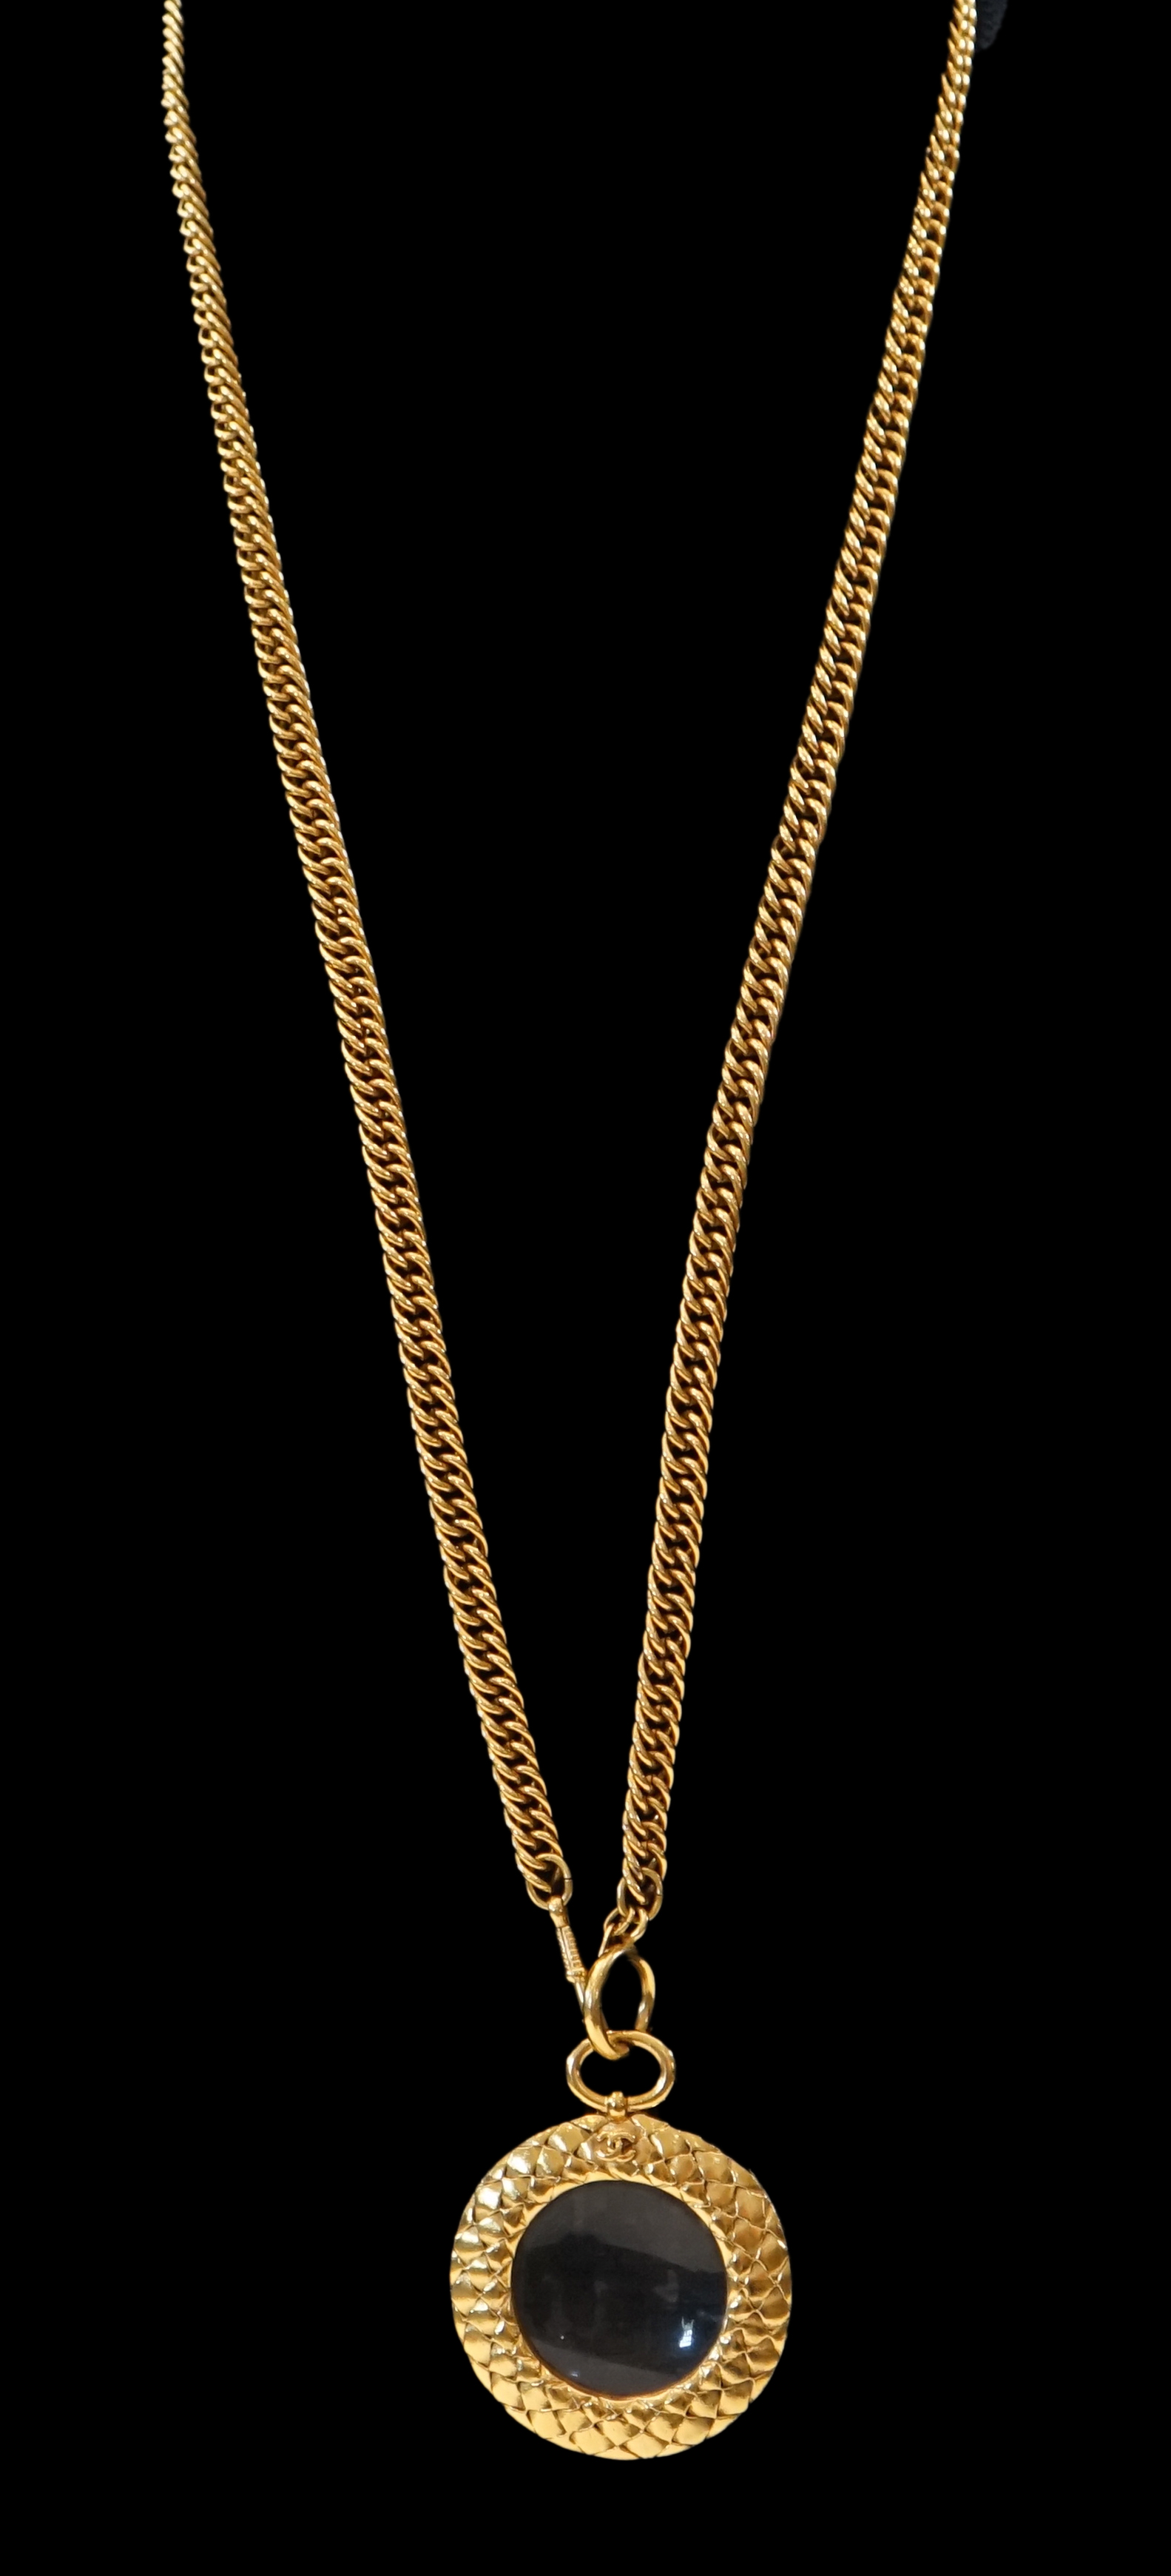 A 1980s Chanel gilt metal 'Scales Textured' magnifying loupe necklace chain length 900mm, pendant width 66mm, height 52mm